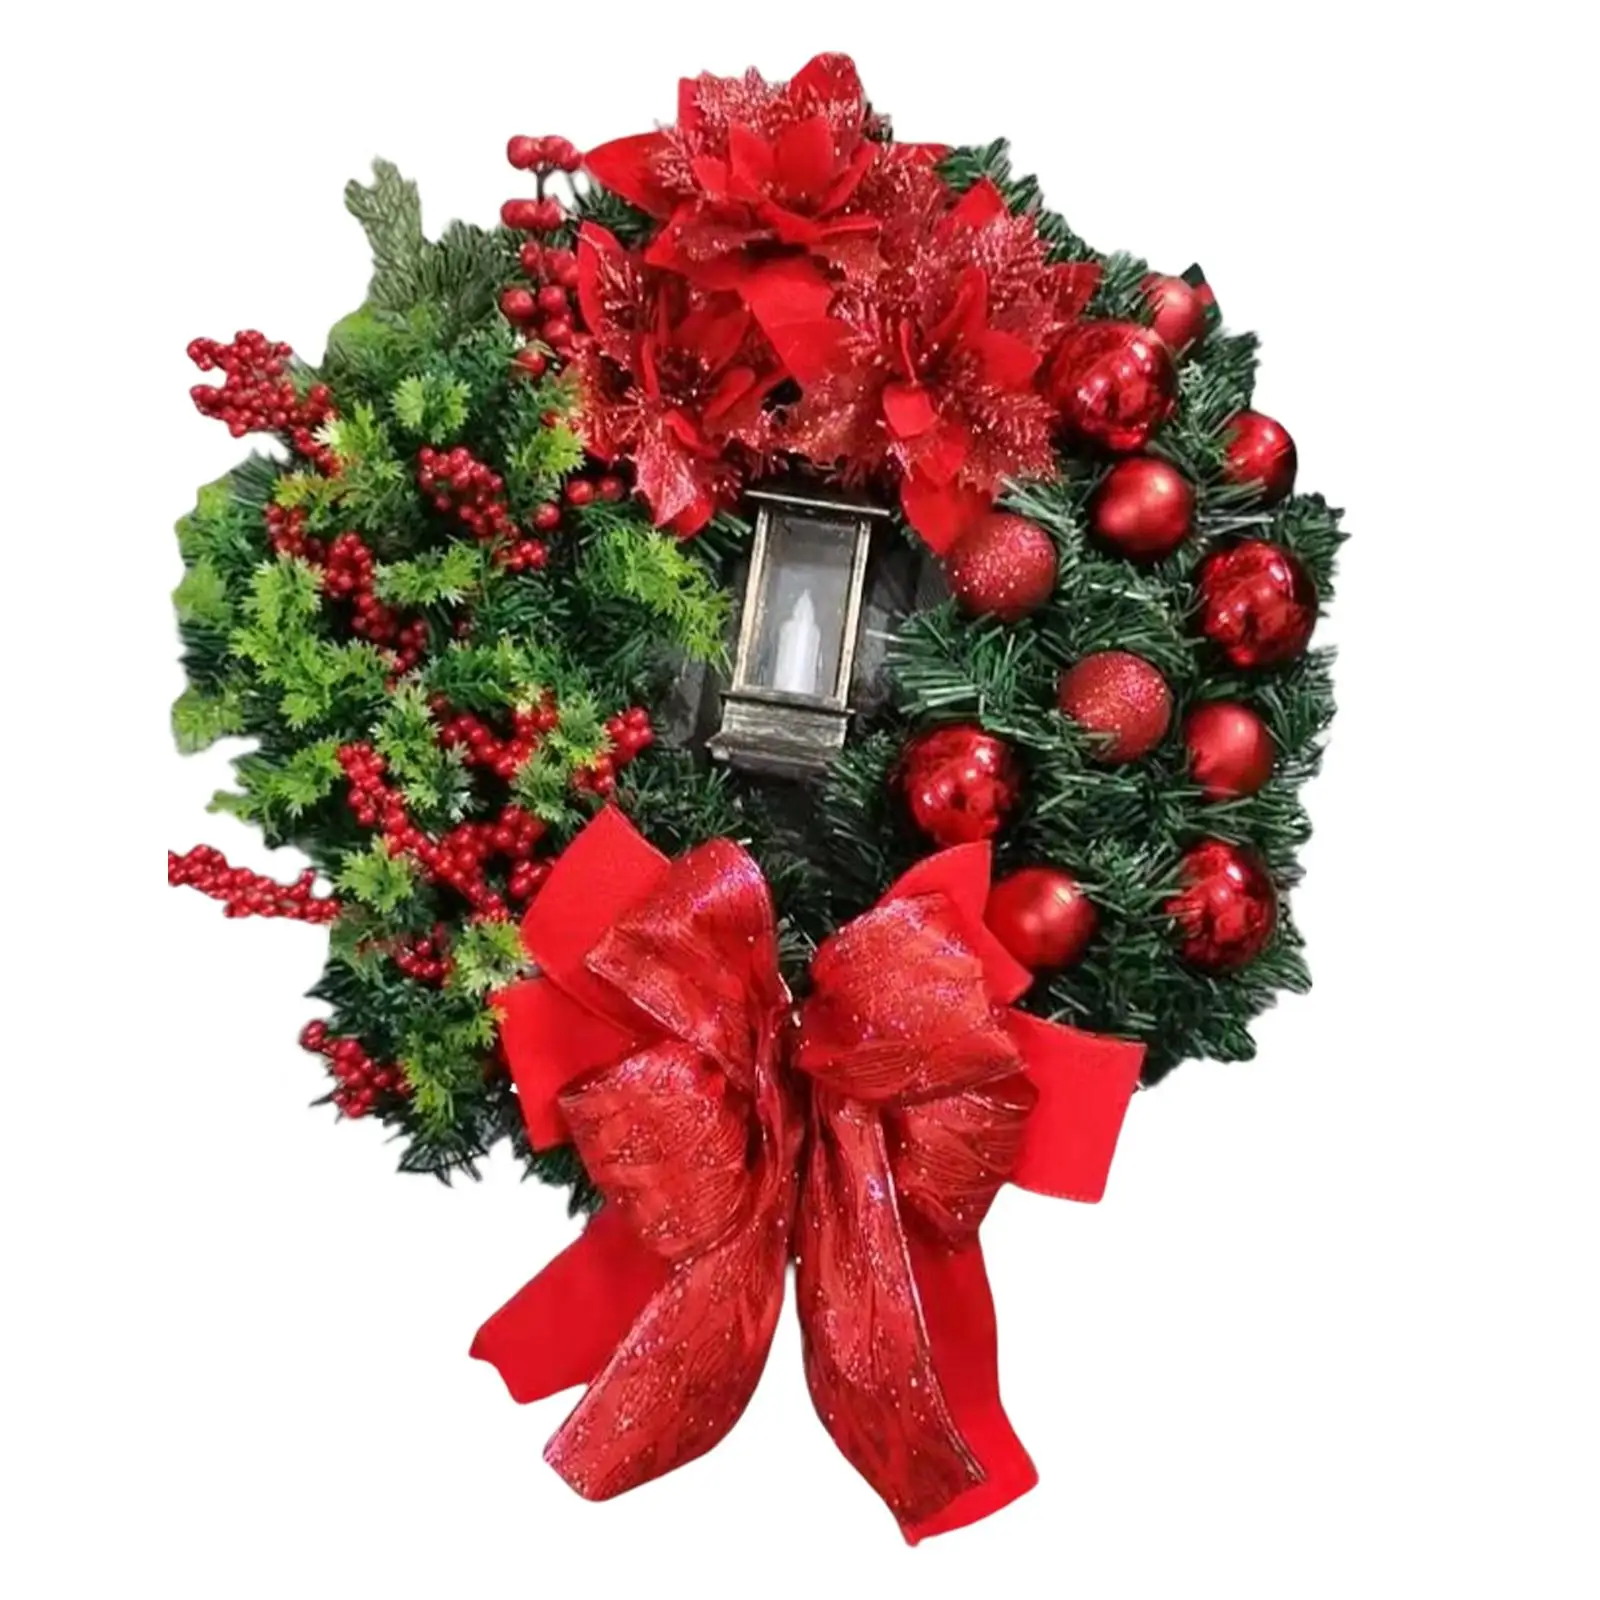 Xmas Wreath Hanging Christmas Garland for Winter Holiday Mantel Fireplace Decorations